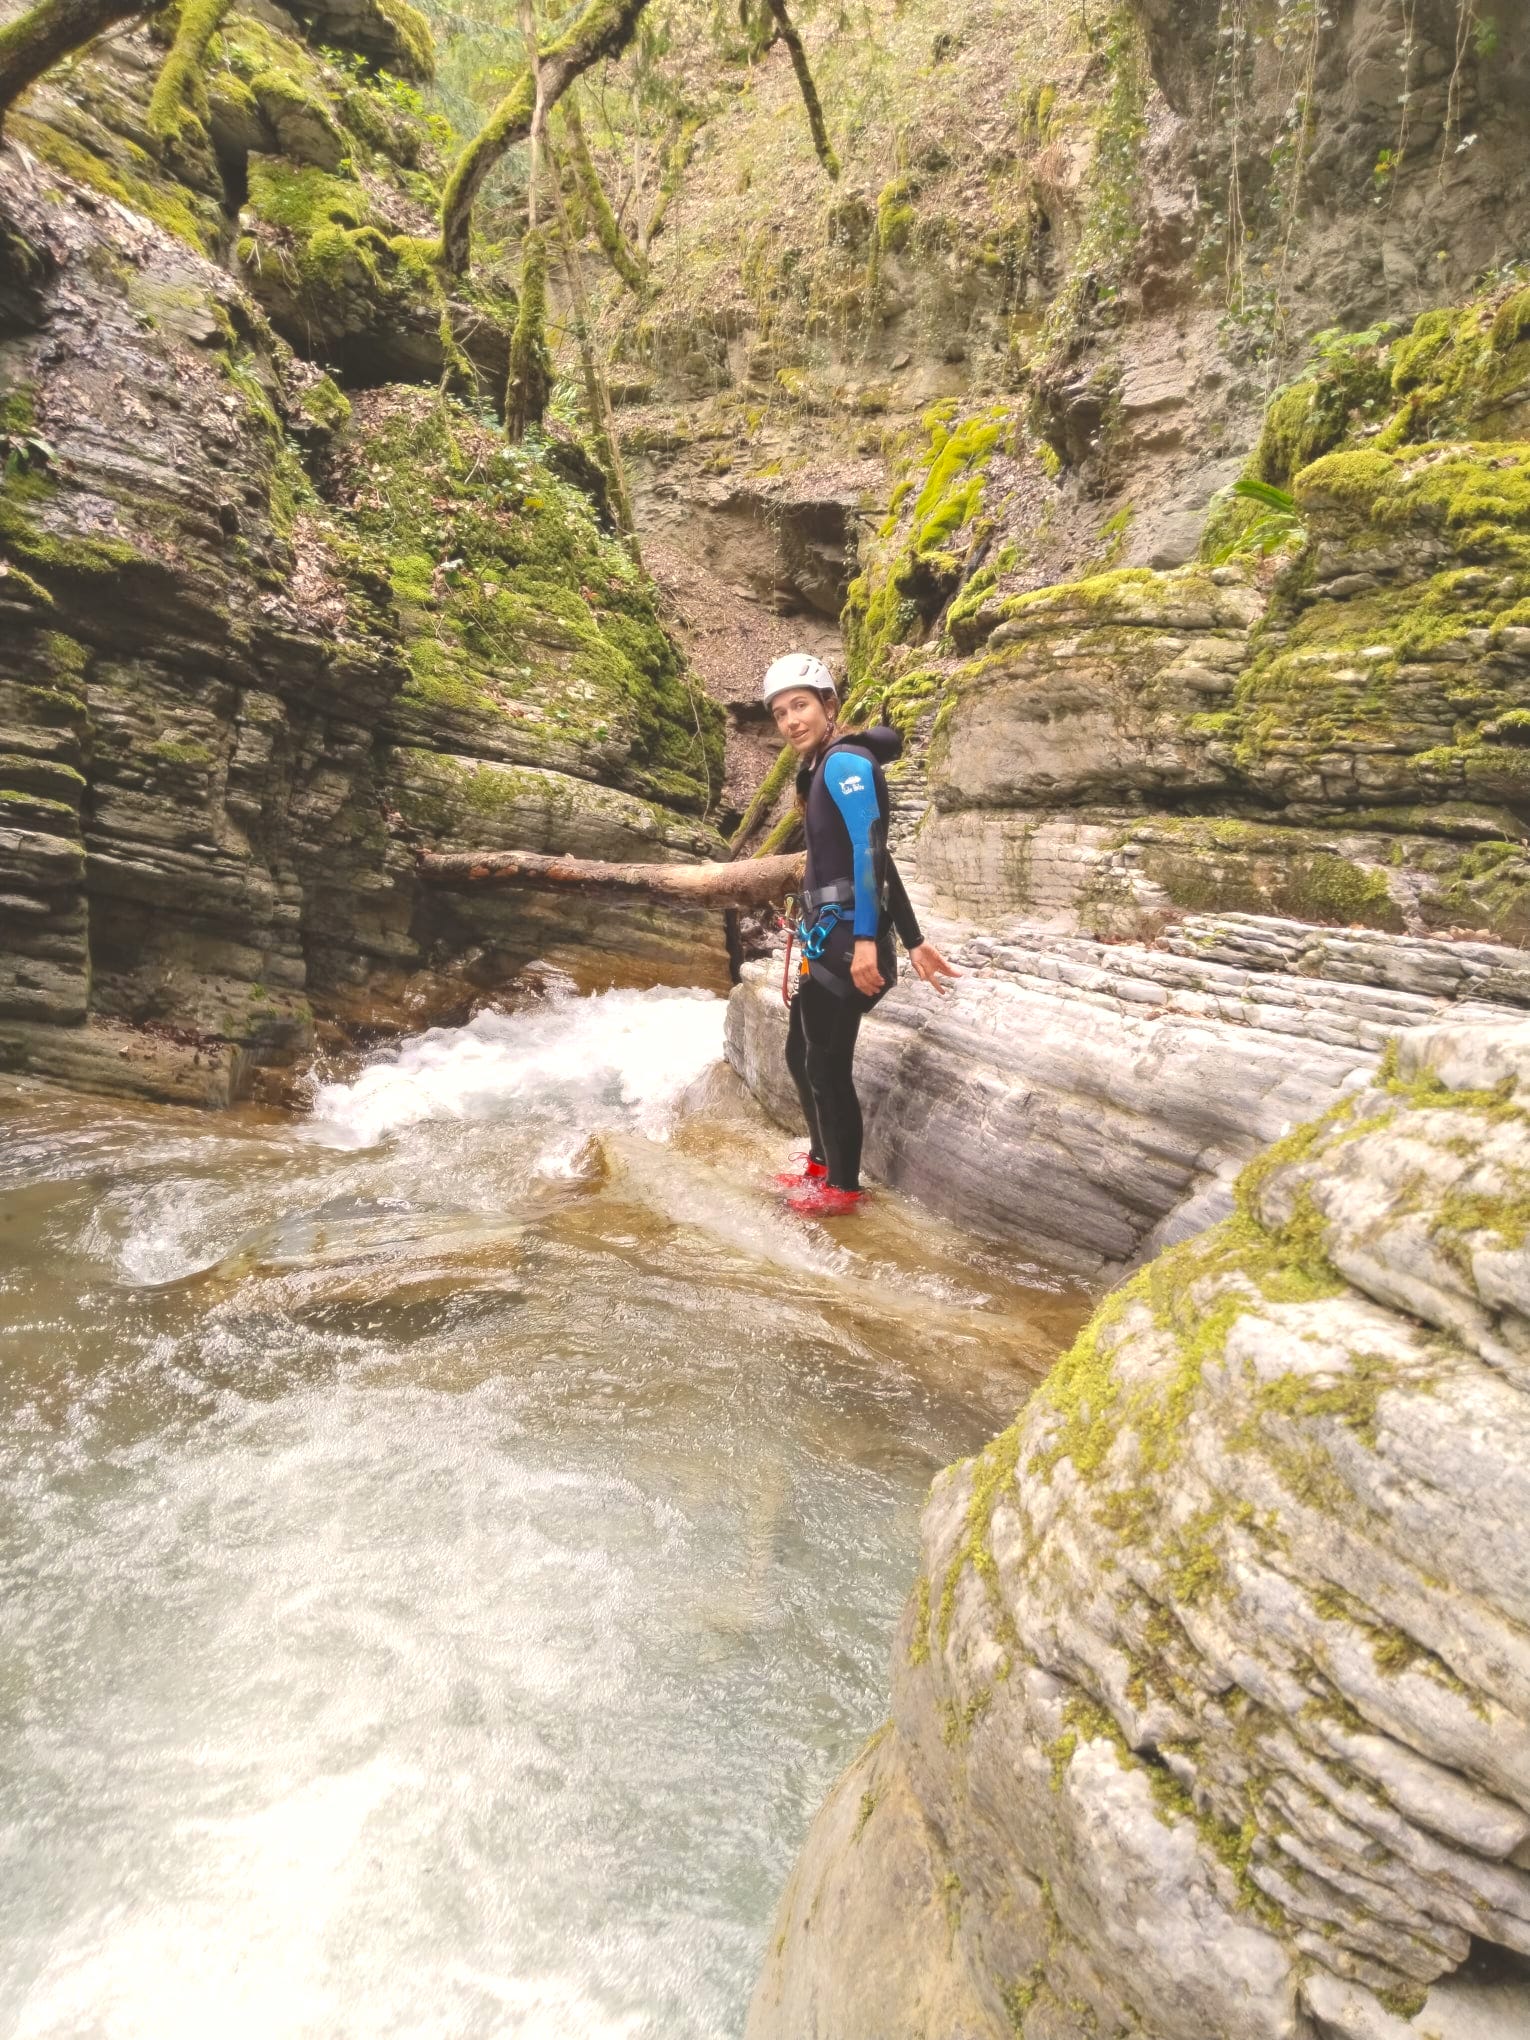 Canyoning Annecy Seythenex